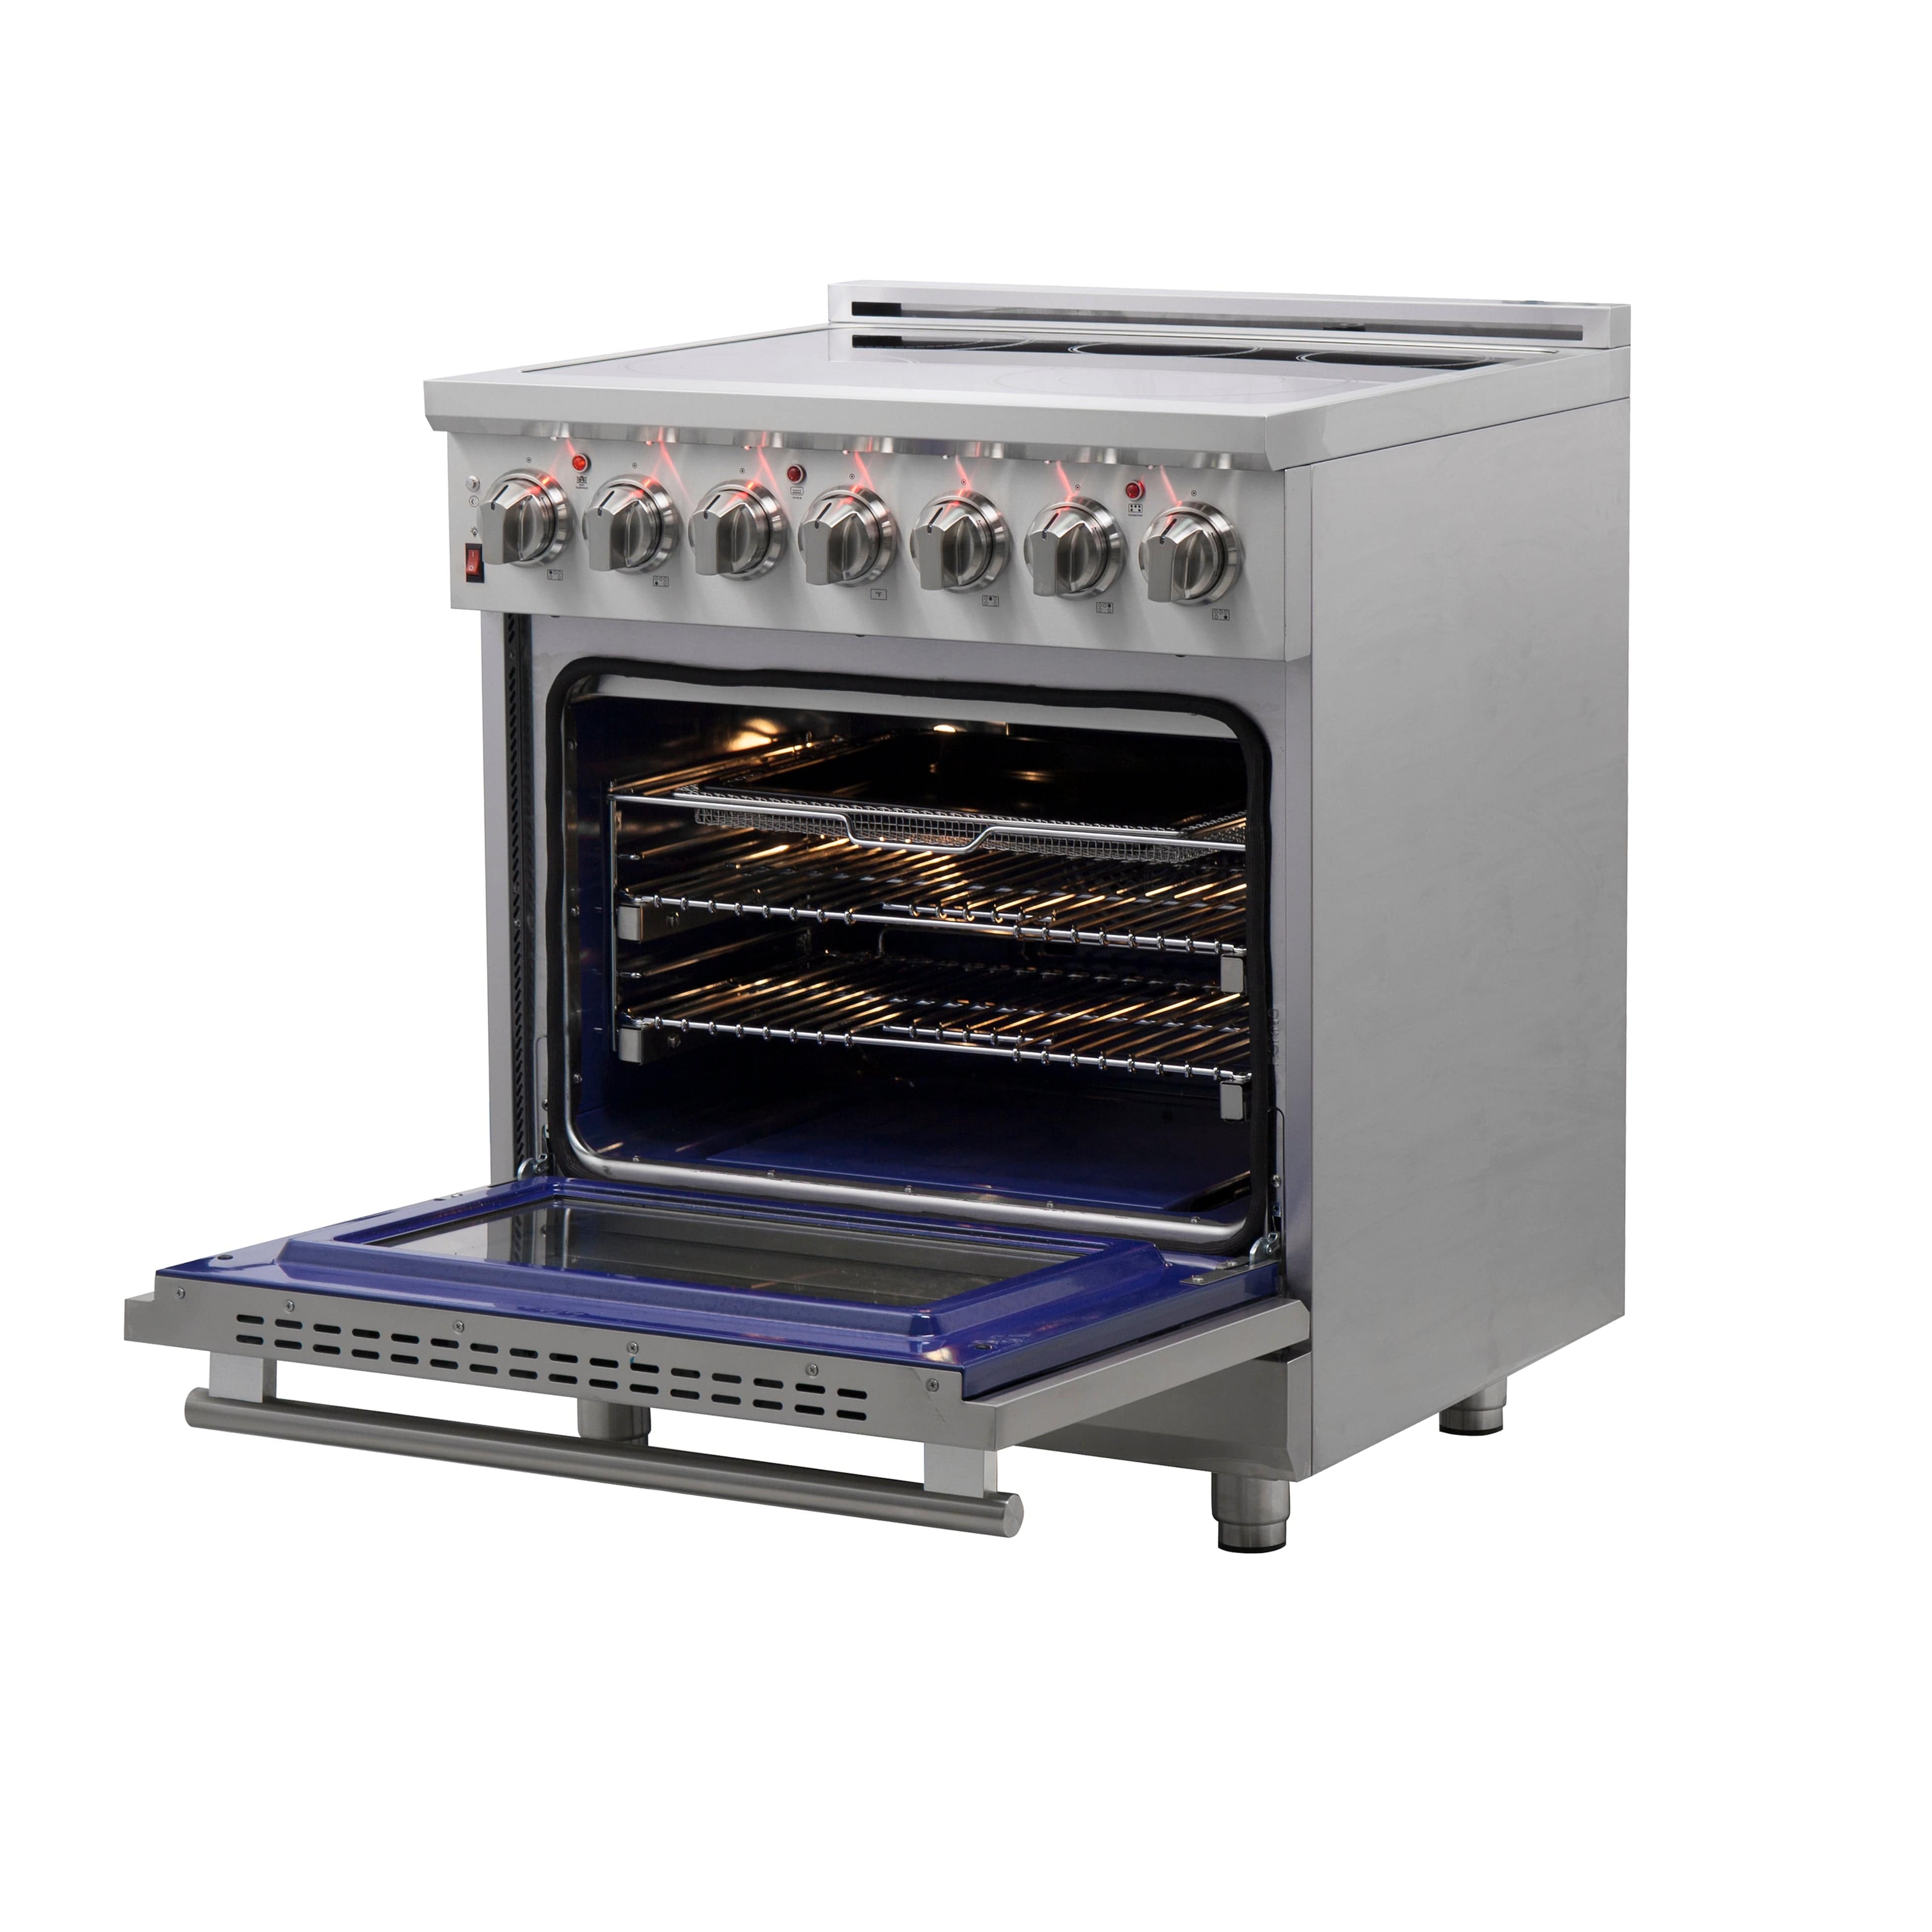 Forno Massimo 30" Freestanding Electric Range with 5 Elements, FFSEL6020-30 Ranges FFSEL6020-30 Luxury Appliances Direct